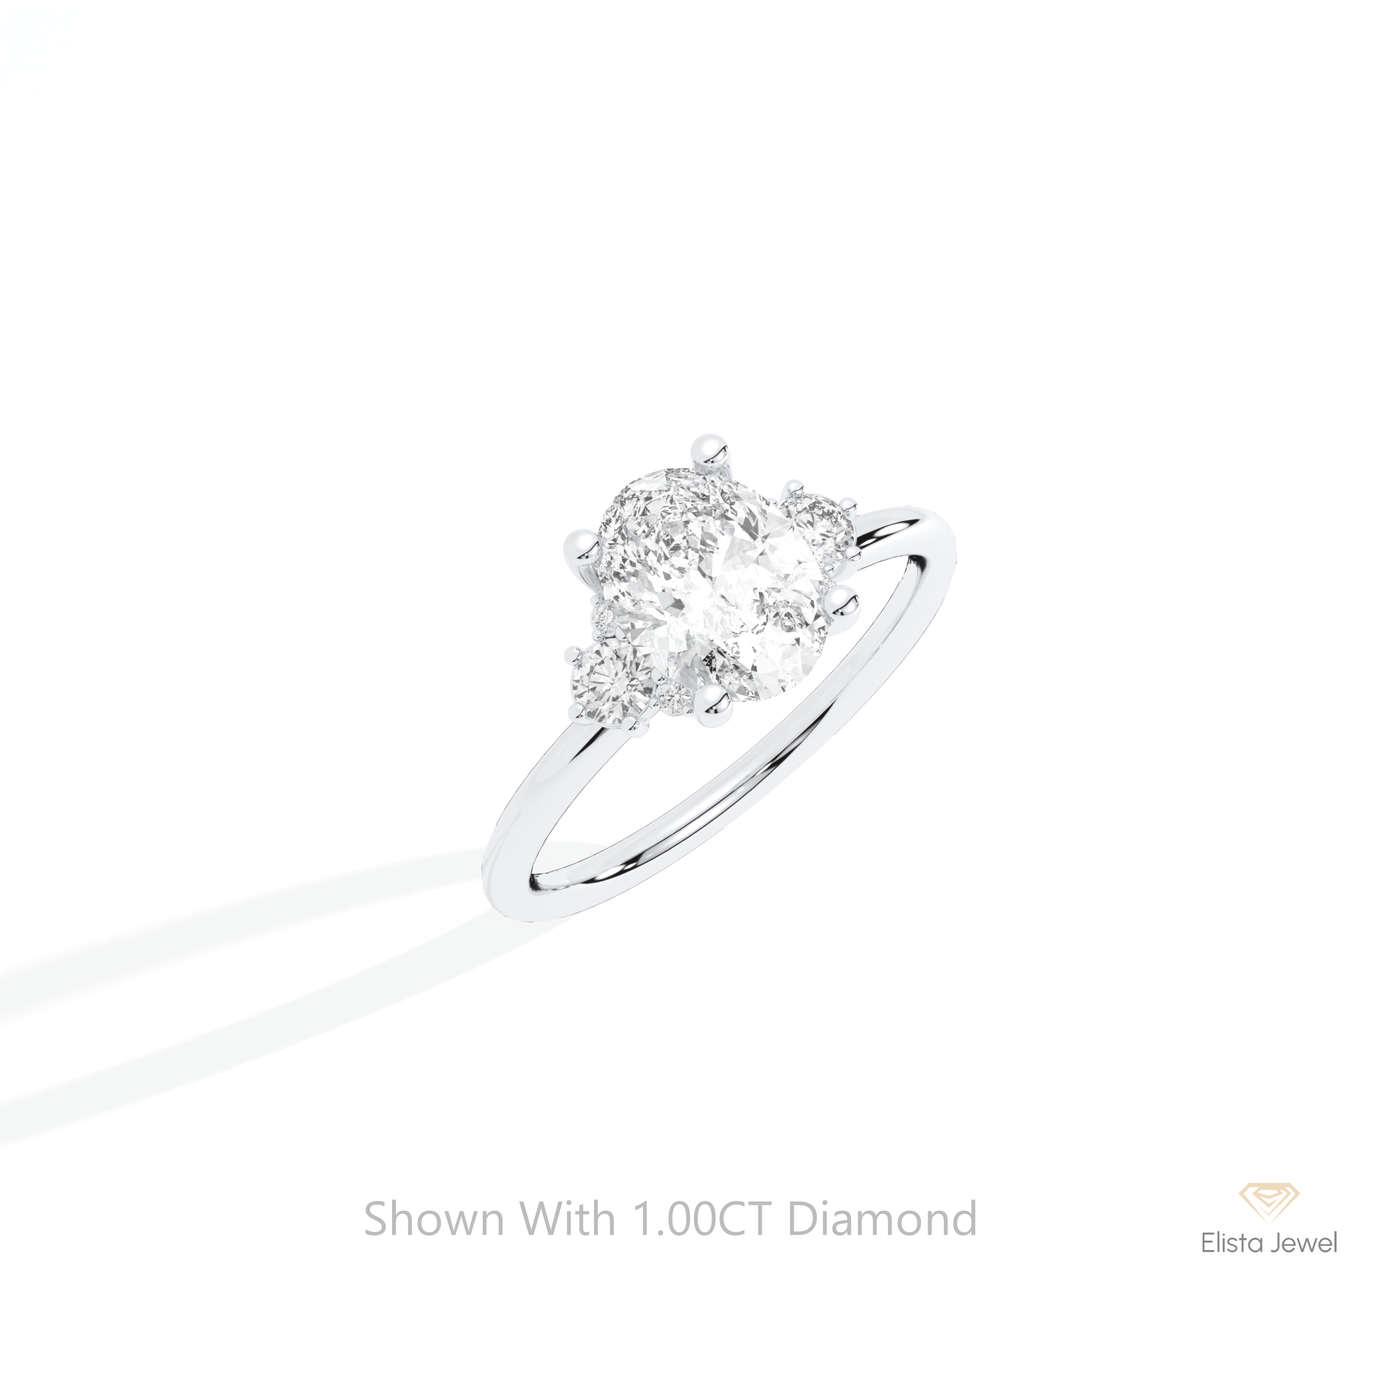 Oval Cut Cluster Engagement Ring